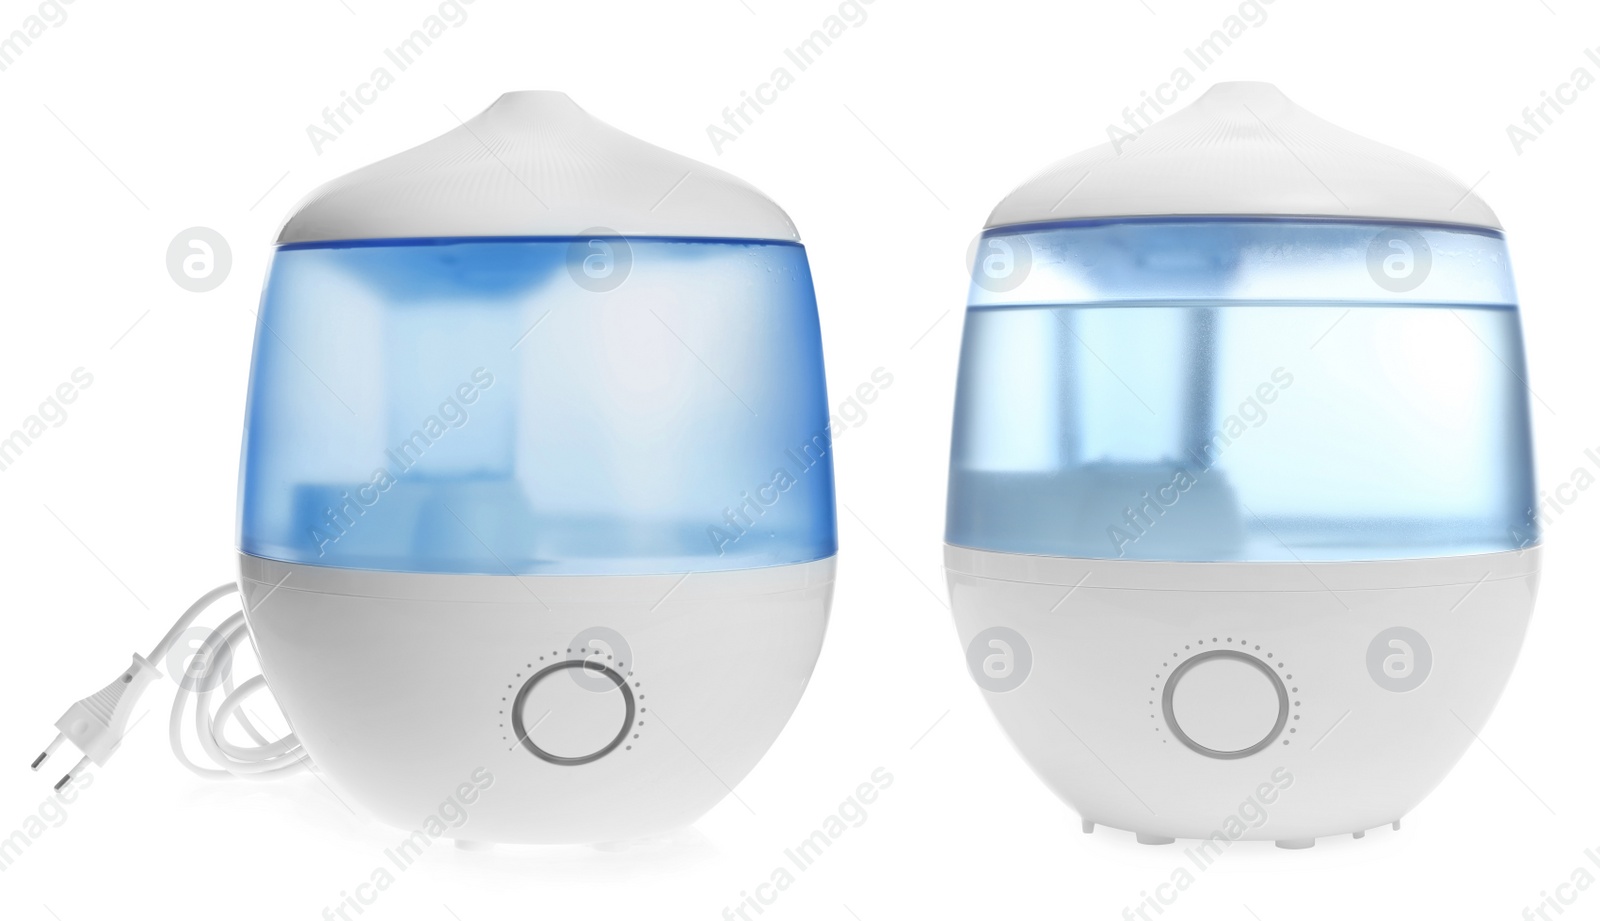 Image of Collage with modern humidifier on white background, view from different sides